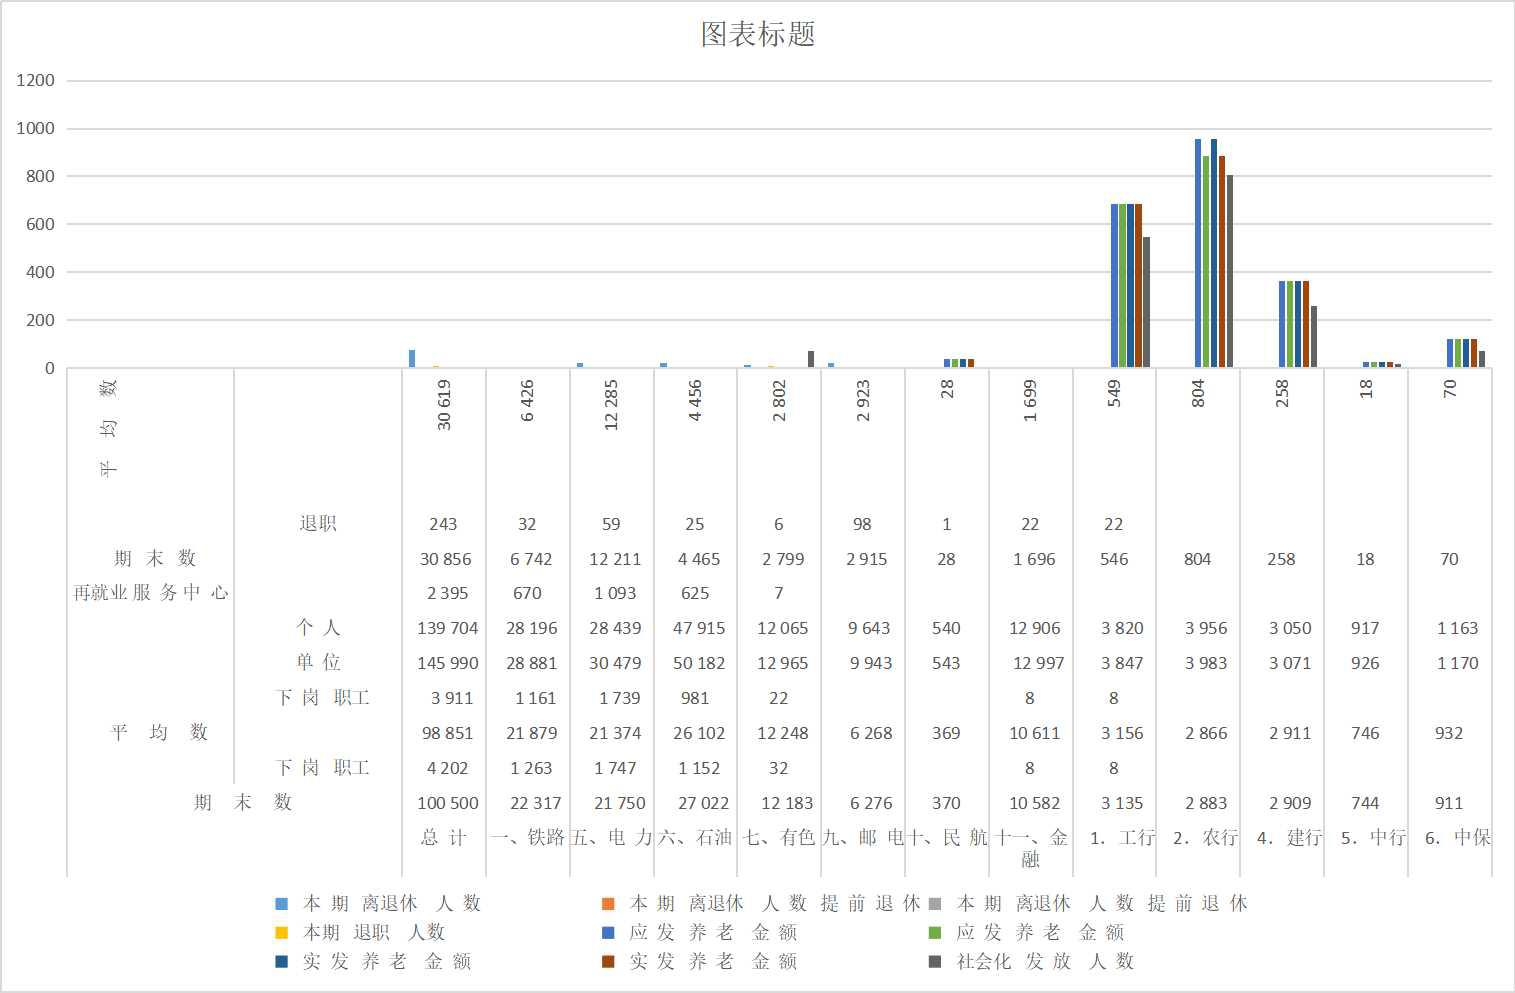 Basic endowment insurance in Qinghai Province (original industry overall planning) (1999-2000)